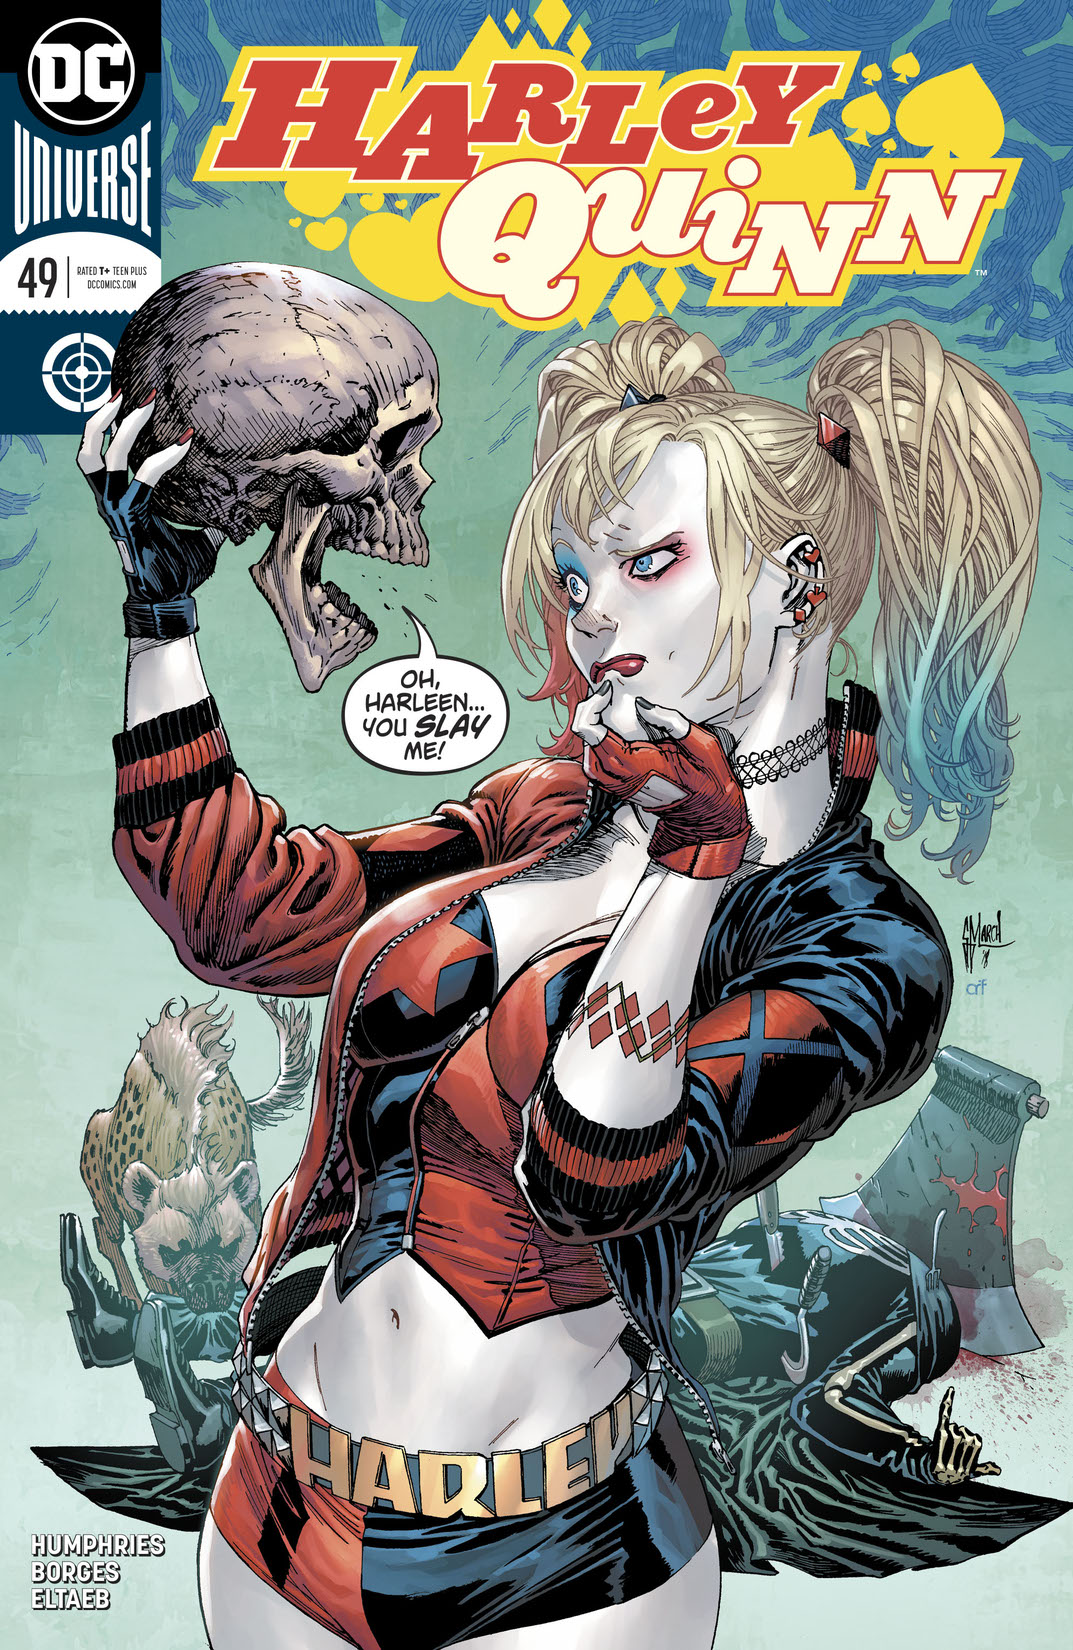 Harley Quinn (2016-) #49 preview images